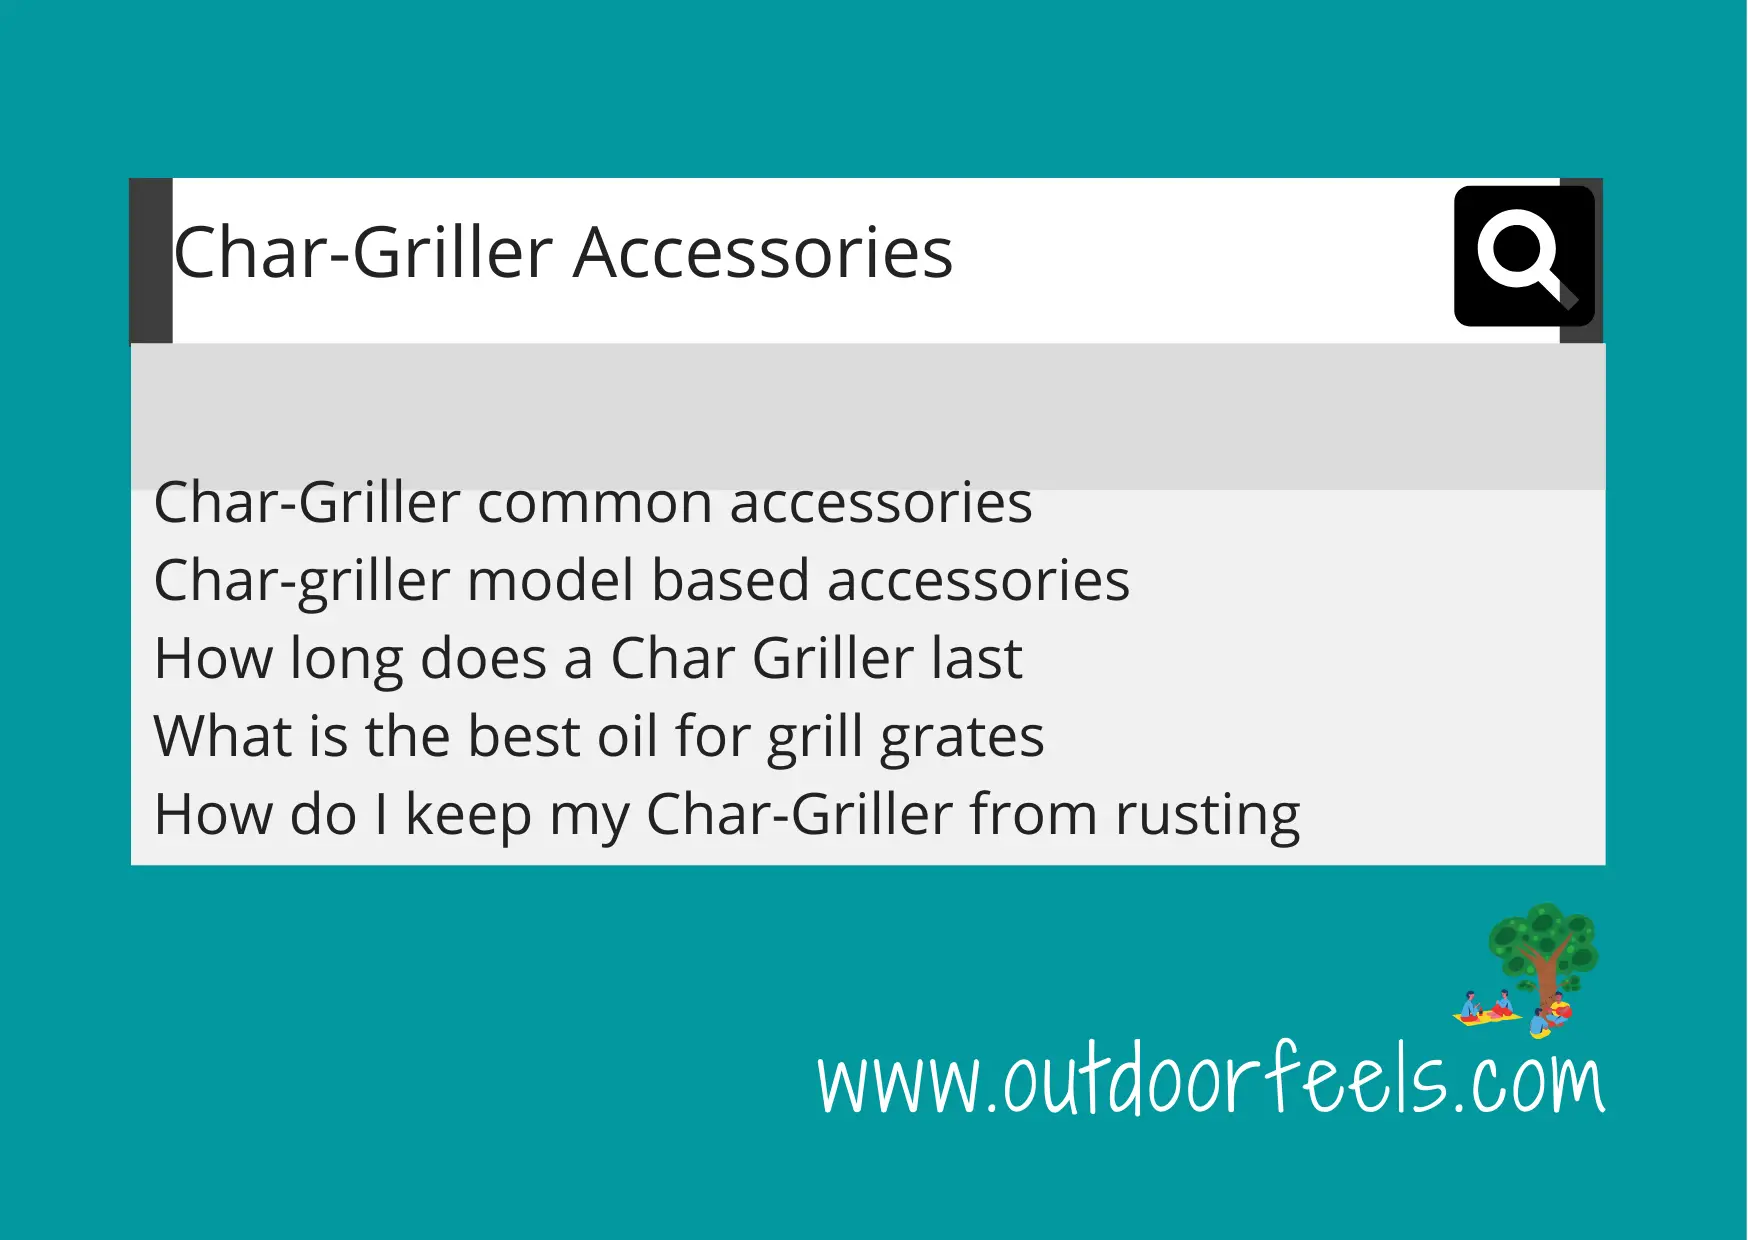 Char-Griller Accessories